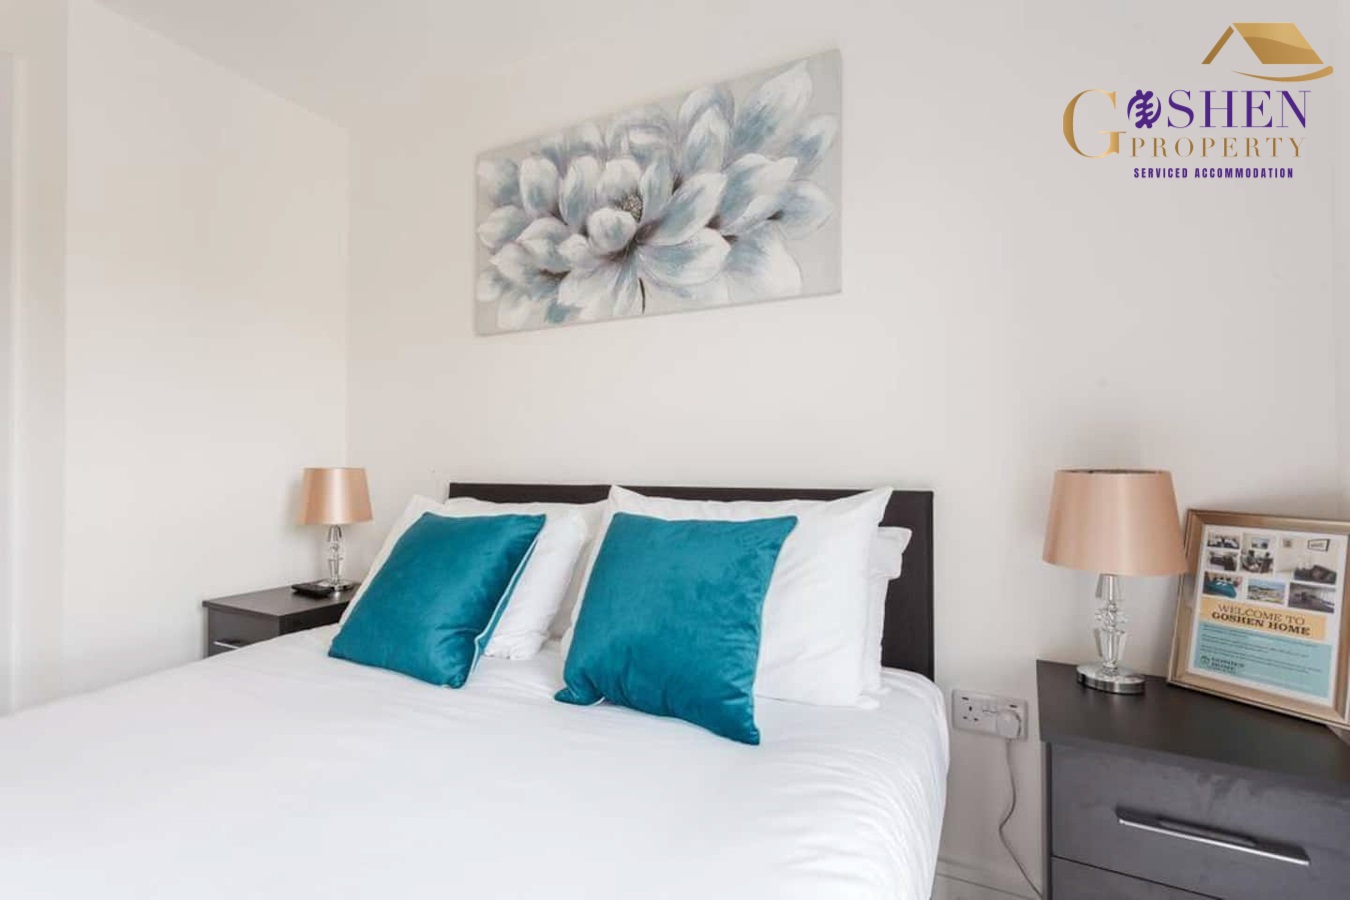 Goshen Serviced Accommodation Apartments 25 Deanery Court - Bedroom 1